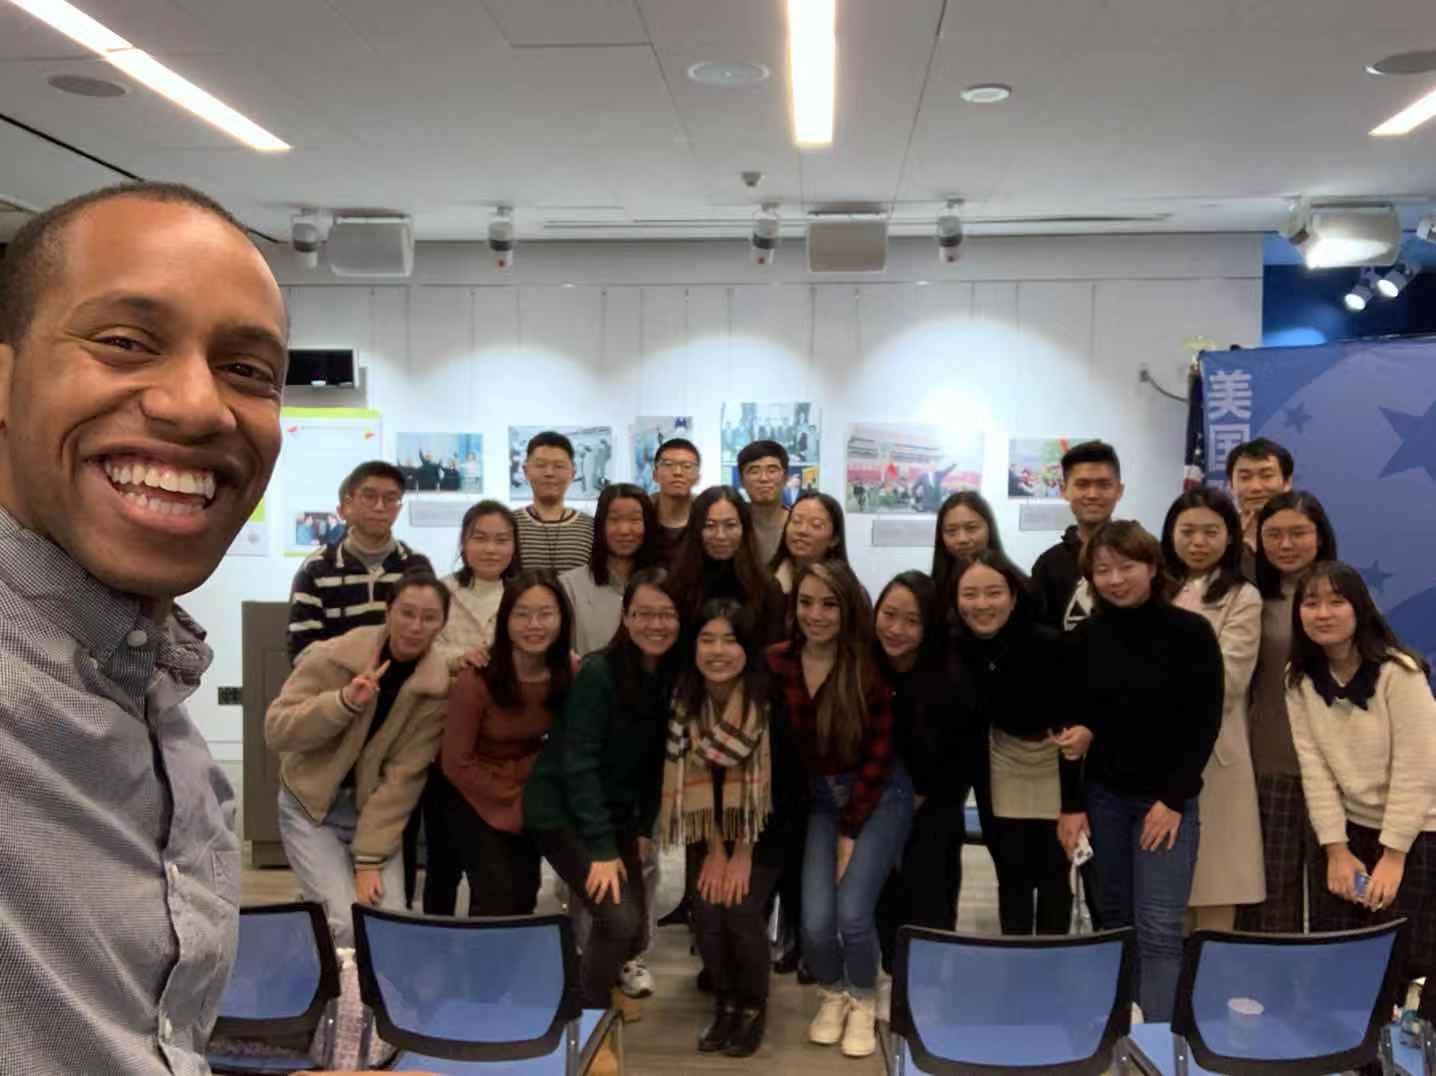 With our wonderful audience at our Gilman scholars panel about the Asian-American experience. Selfie photo credit to our wonderful organizer Nick Grandchamps!